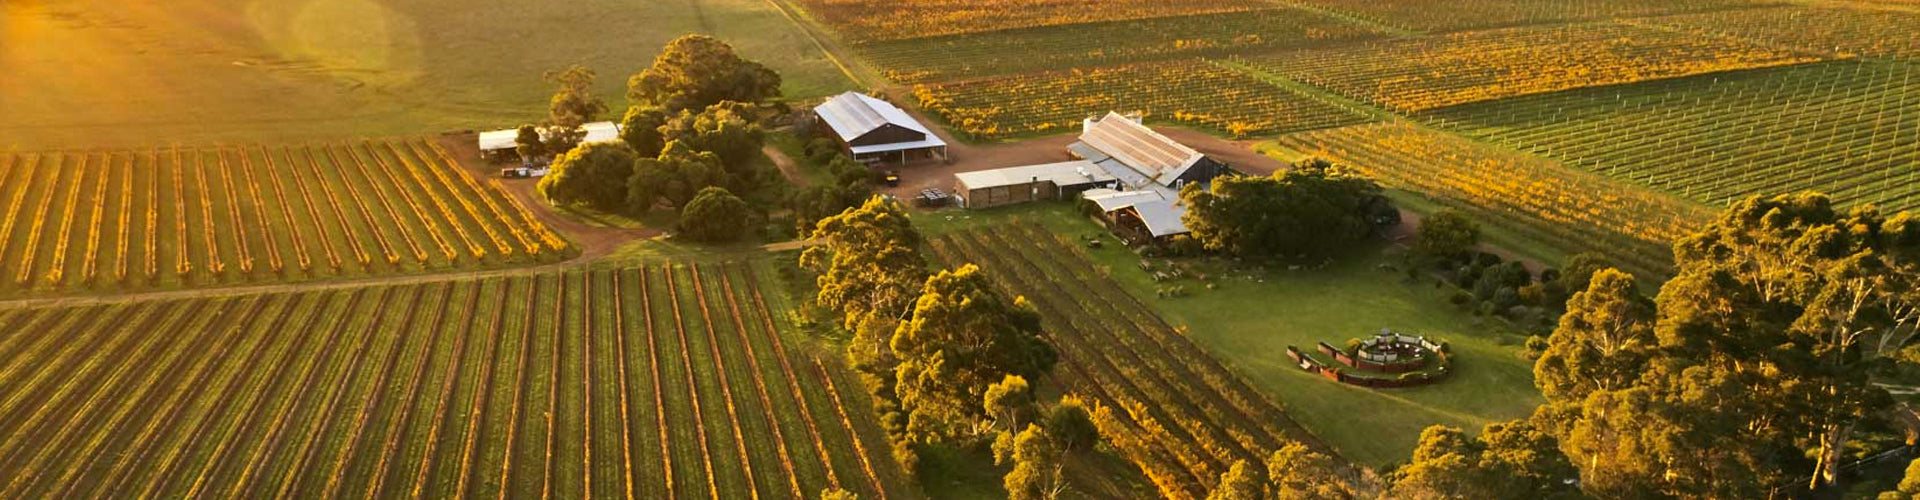 Arial photo of Cullen Wines Winery & Vineyards